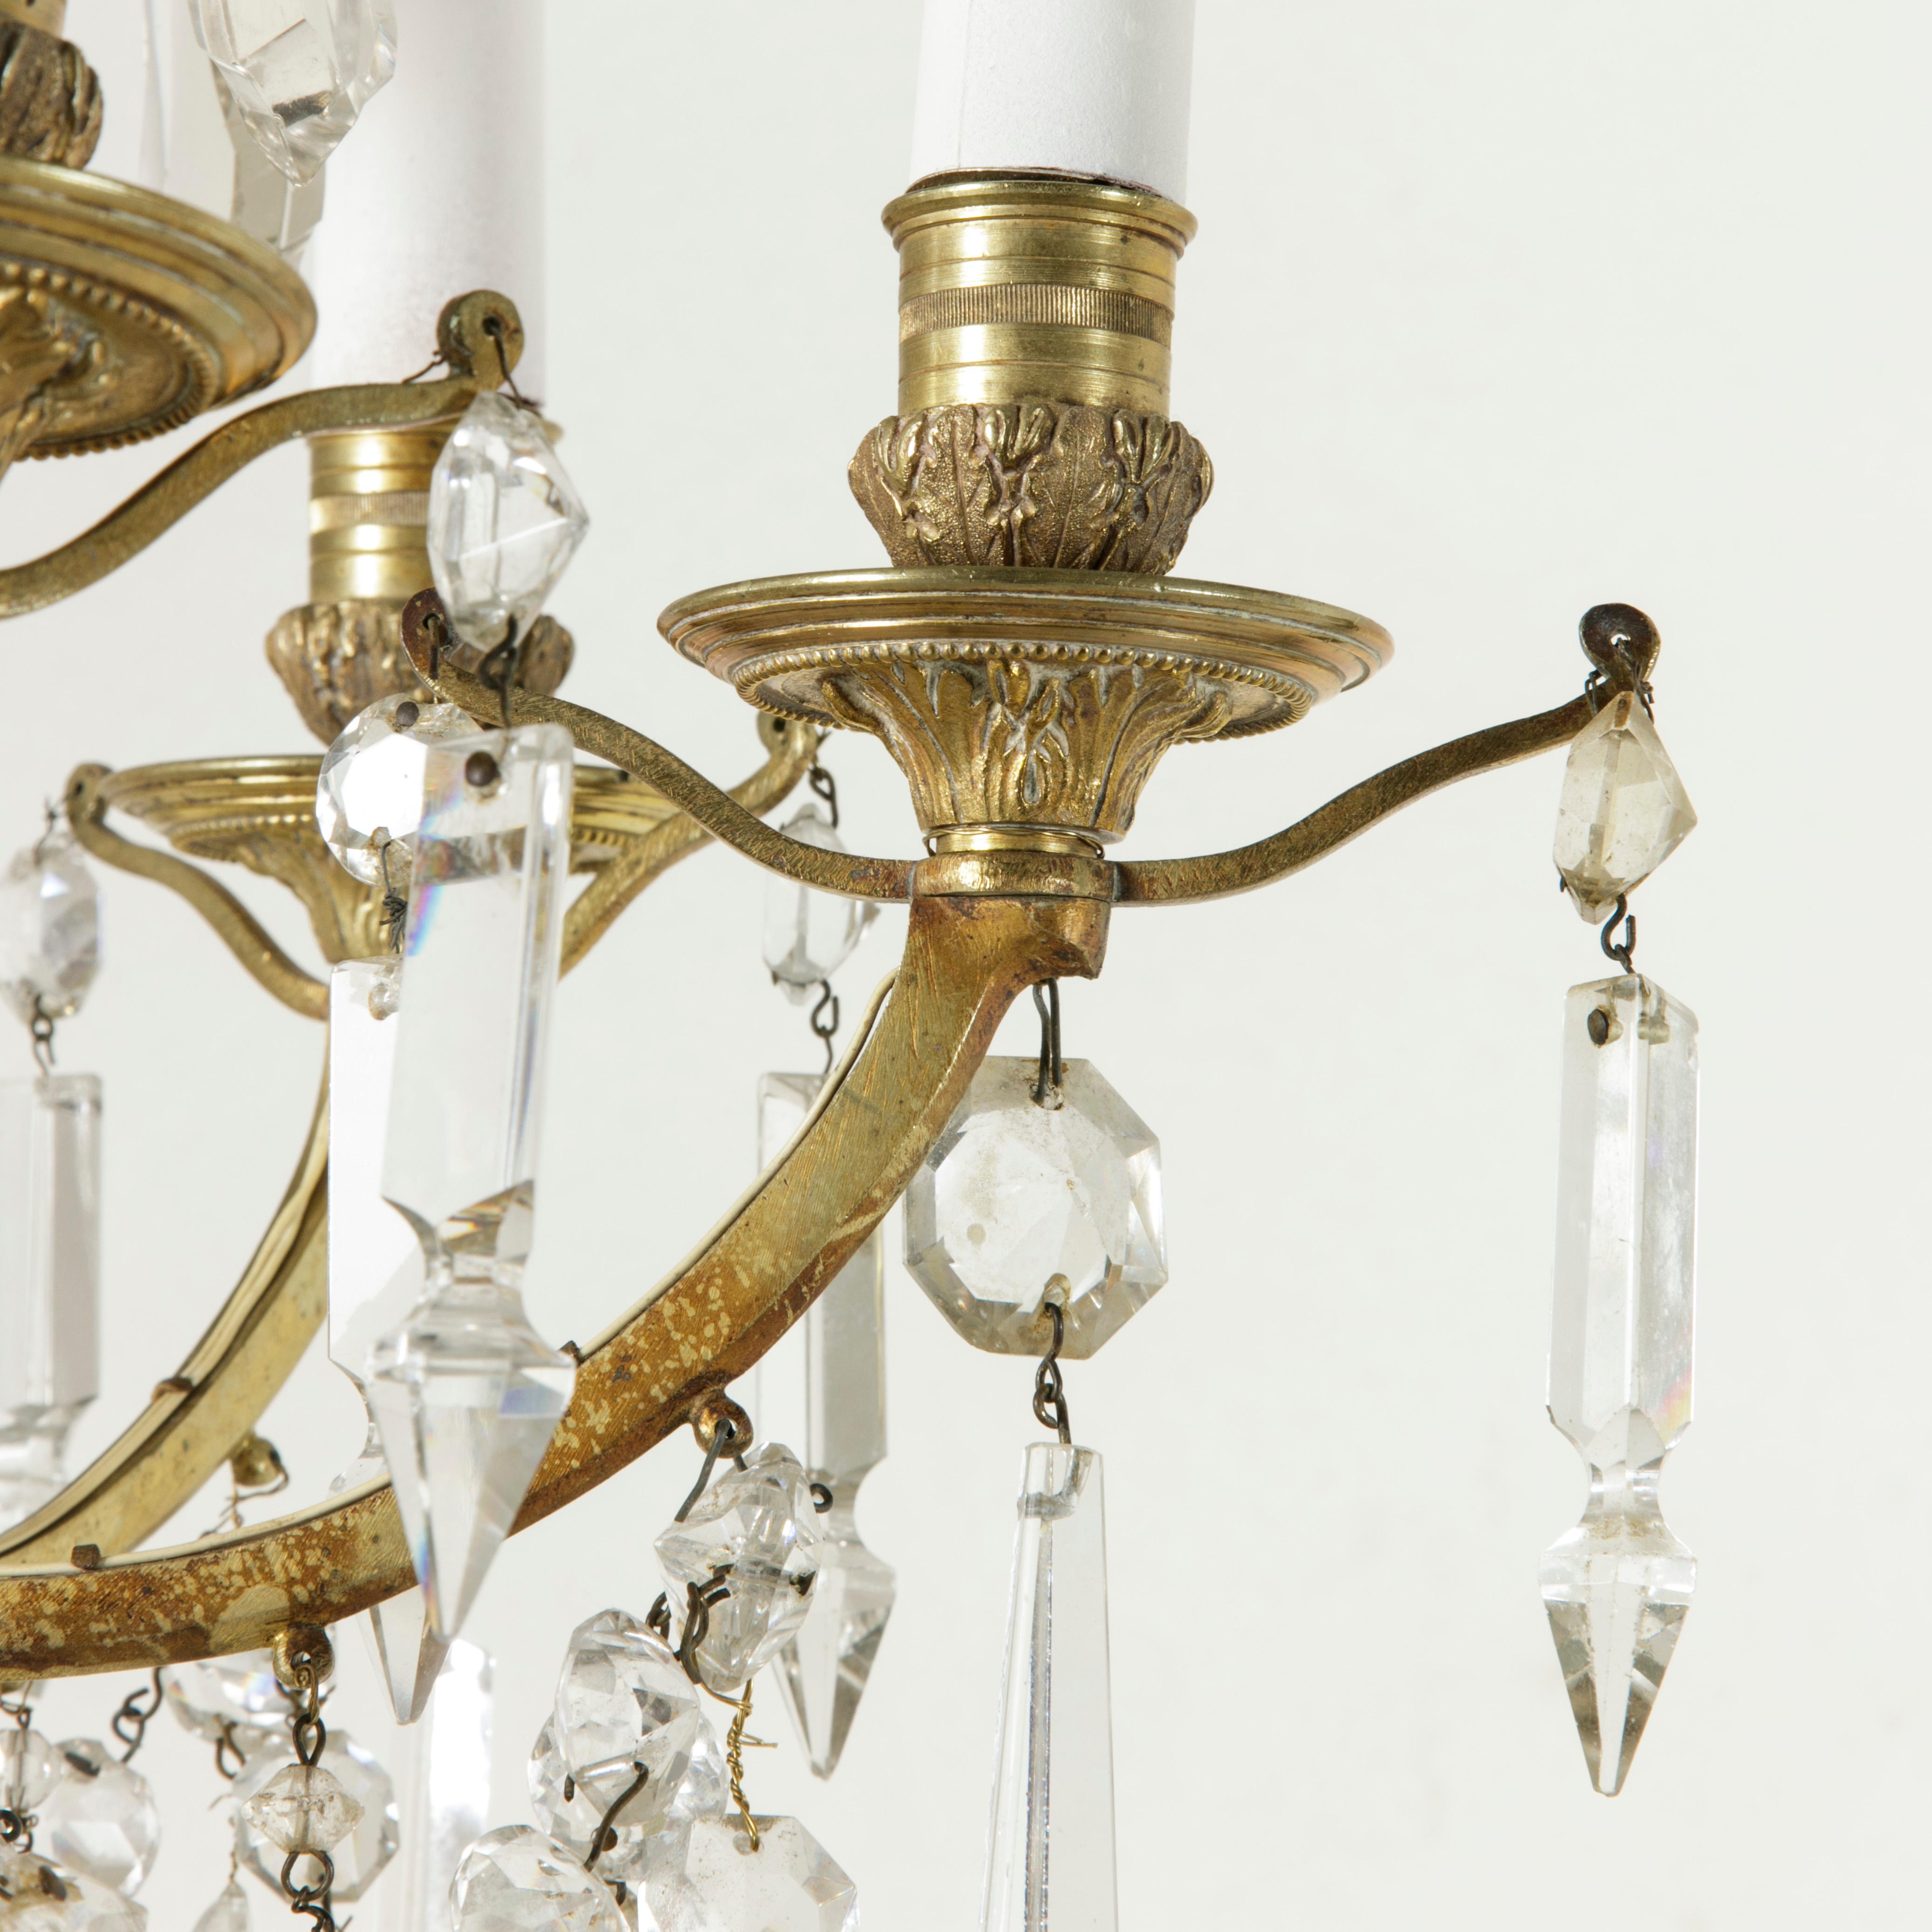 19th Century French Gilt Bronze snd Crystal Chandelier with Six Arms For Sale 1